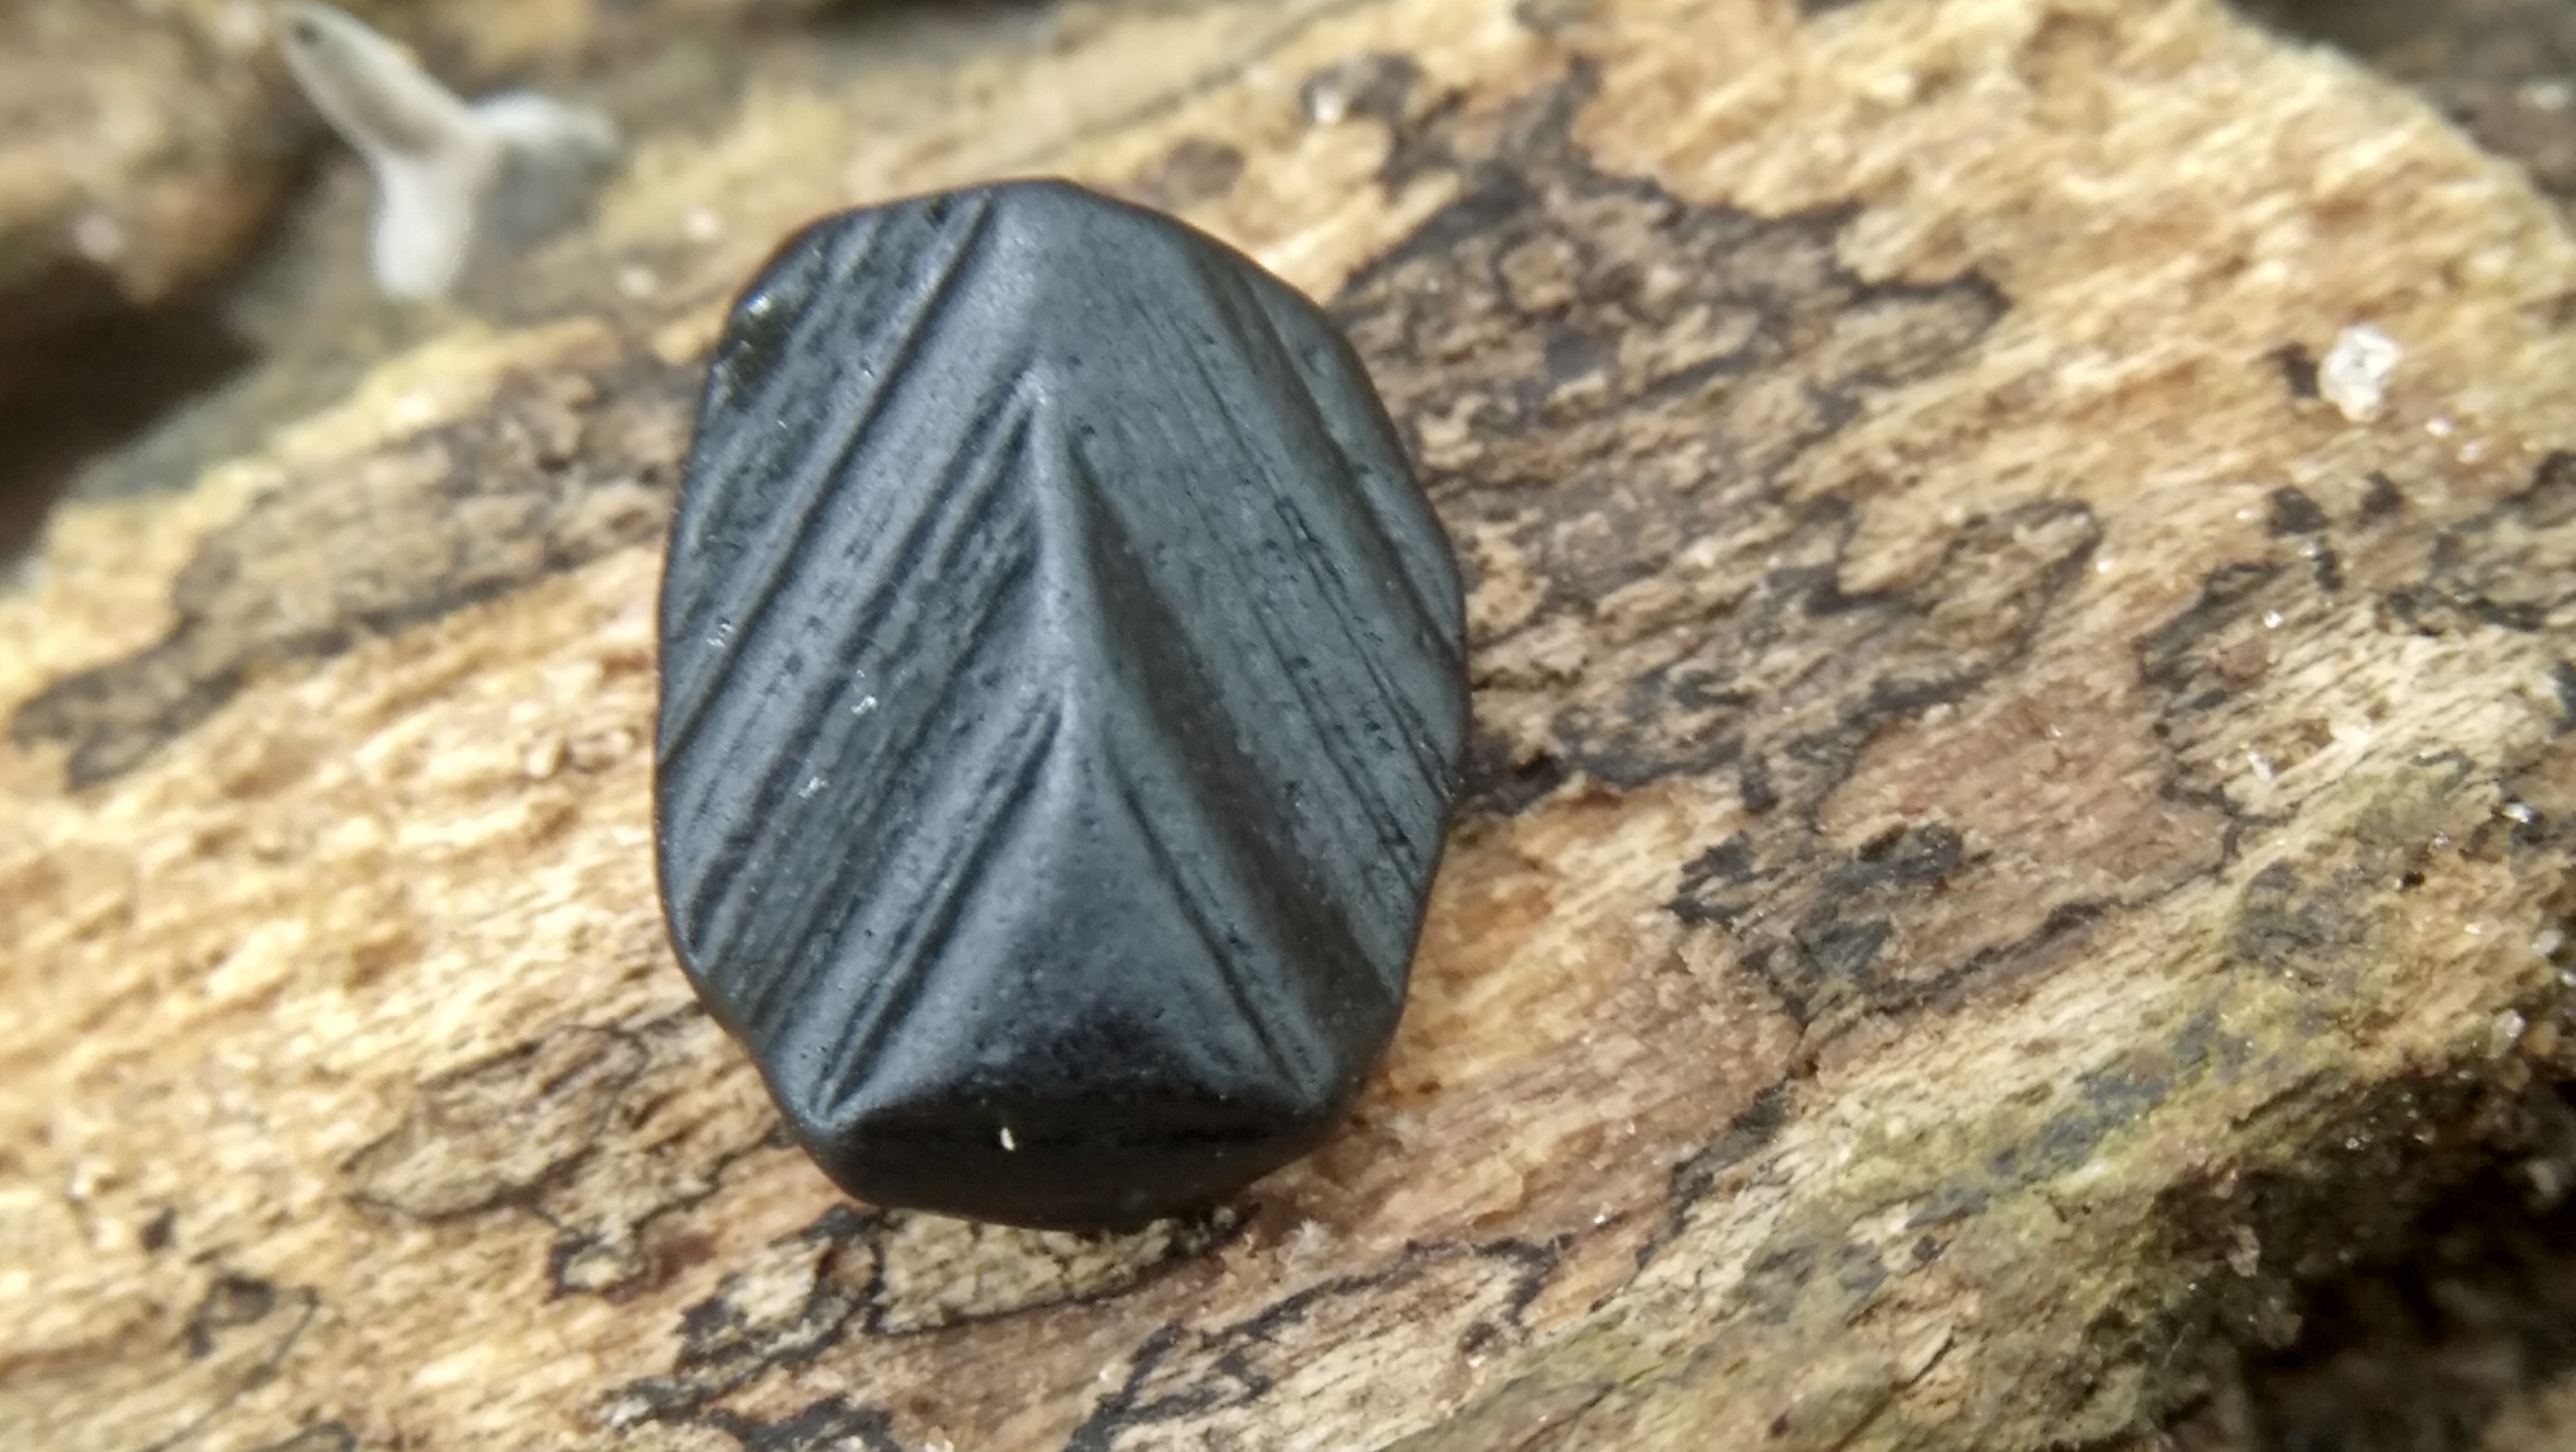 Beauty Of nature Creation, Ceylon Natural Black Spinel With special earth creation " Trigon Δ " Mark https://youtu.be/34Blovp2XOg https://danugroup.lk Spinel is the magnesium aluminium member of the larger spinel group of minerals. It has the formula MgAl₂O₄ in the cubic crystal system. Its name comes from Latin "spina" Spinel helps to release stress and worry whilst replenishing depleted energy.